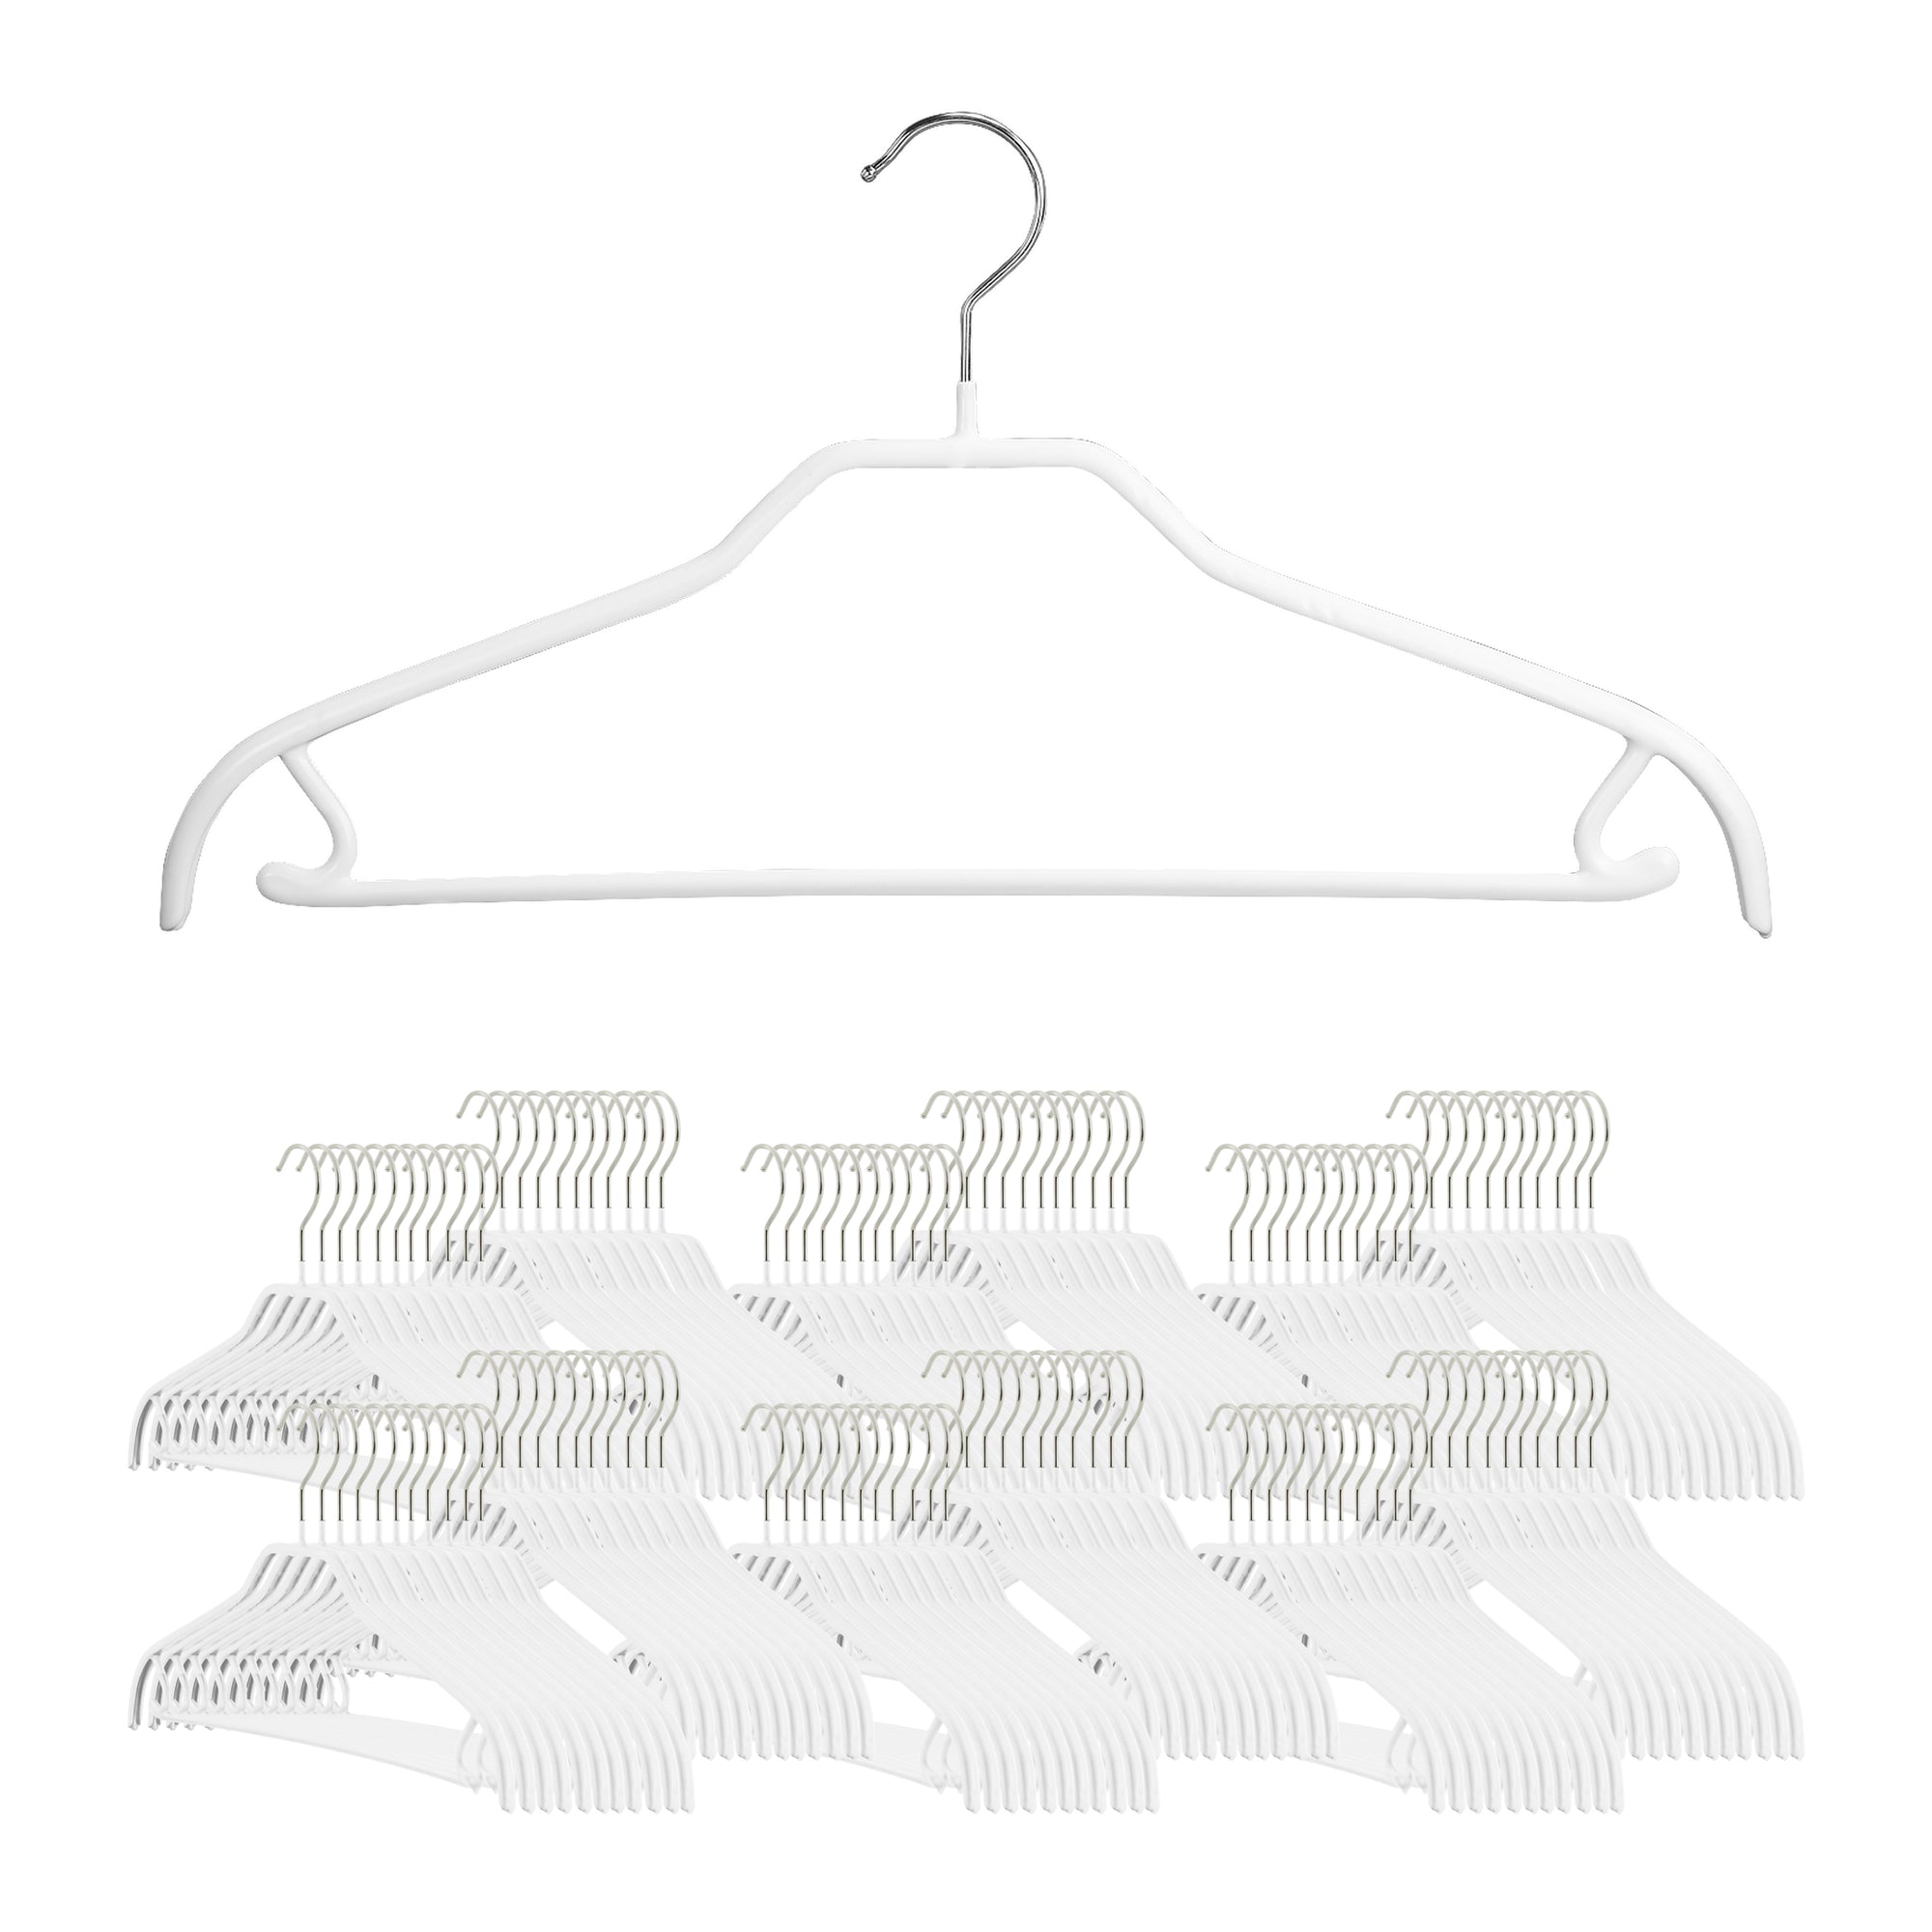 Mawa by Reston Lloyd Silhouette Ultra Light Thin Non-Slip Space Saving Style 42/FT Clothes Hanger for Shirts, Set of 20, Silver